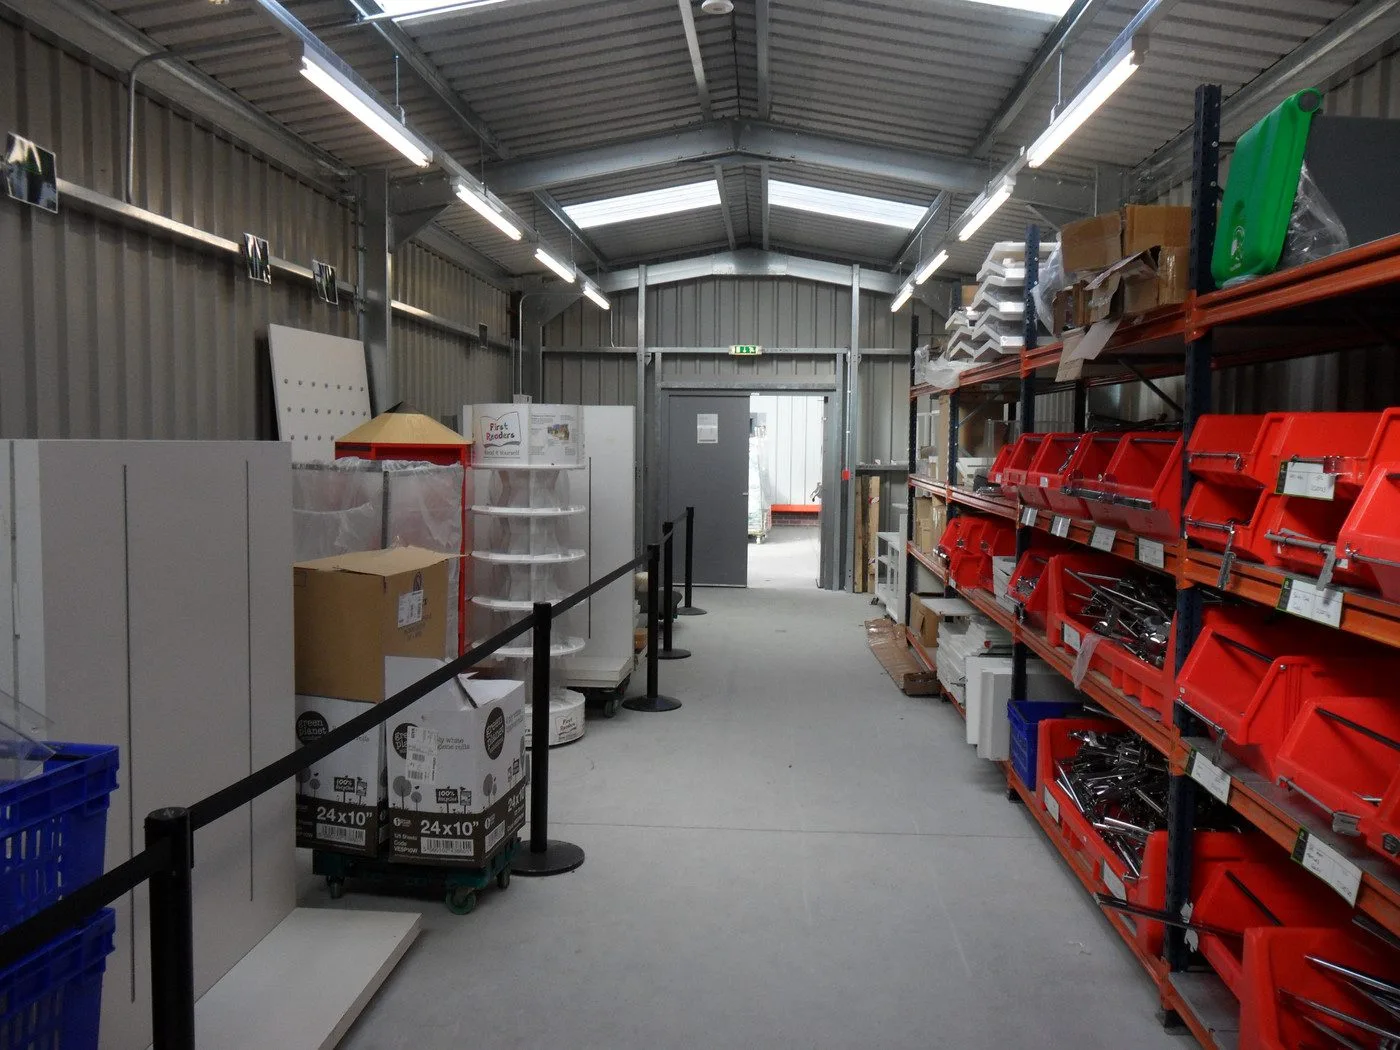 Racking system installed in a storage building for marks & spencer's in Warrington by Springfield Steel Buildings